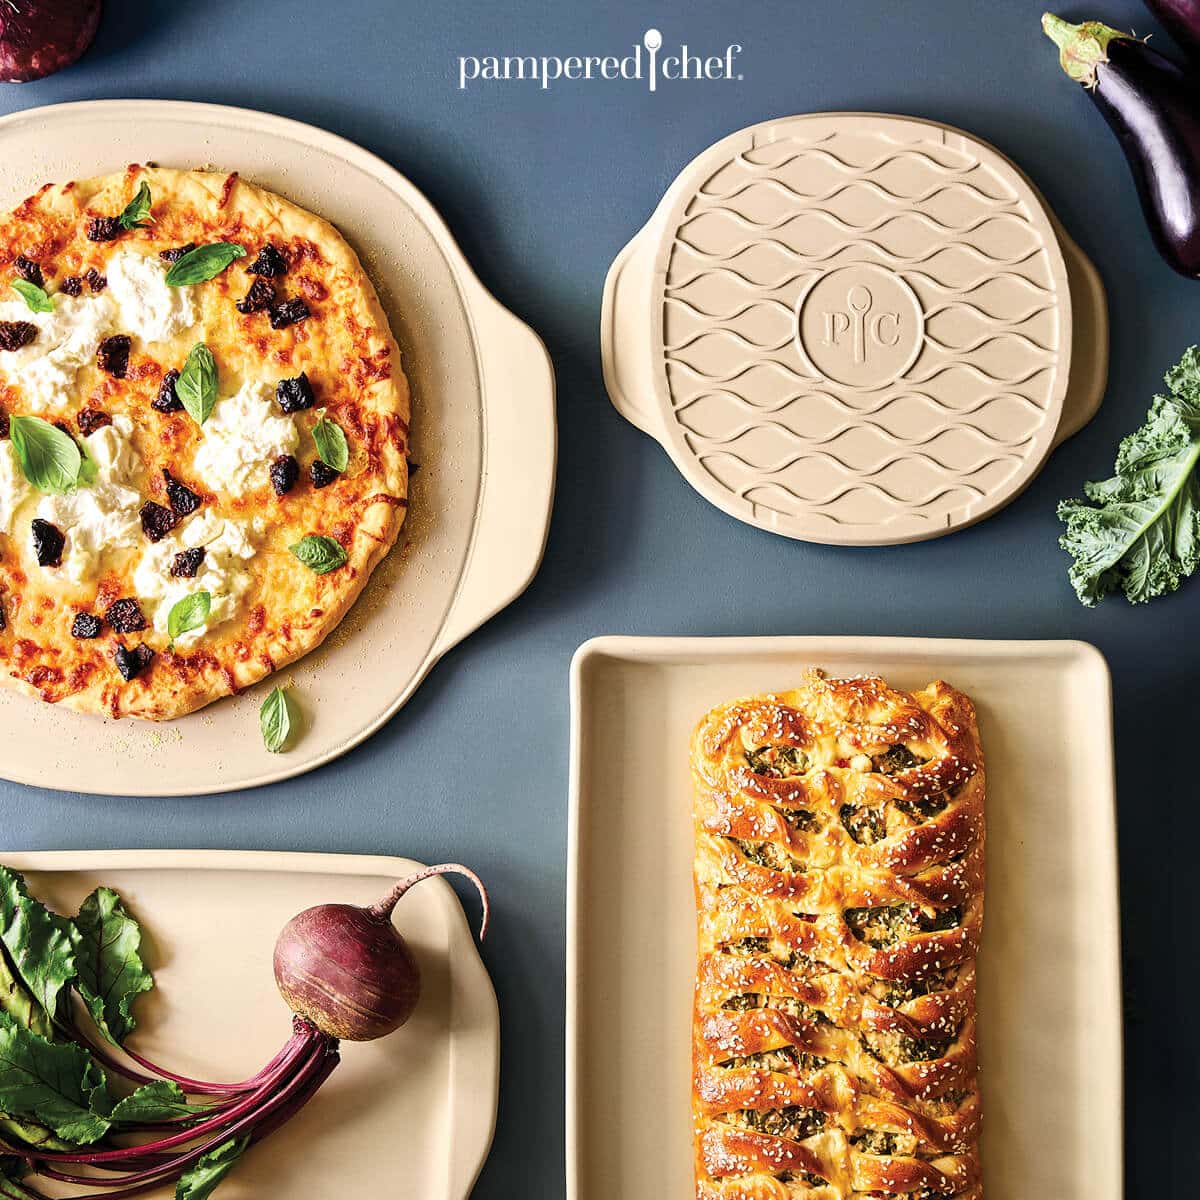 Top 10 New Products from Pampered Chef this Fall - Midwest Goodness